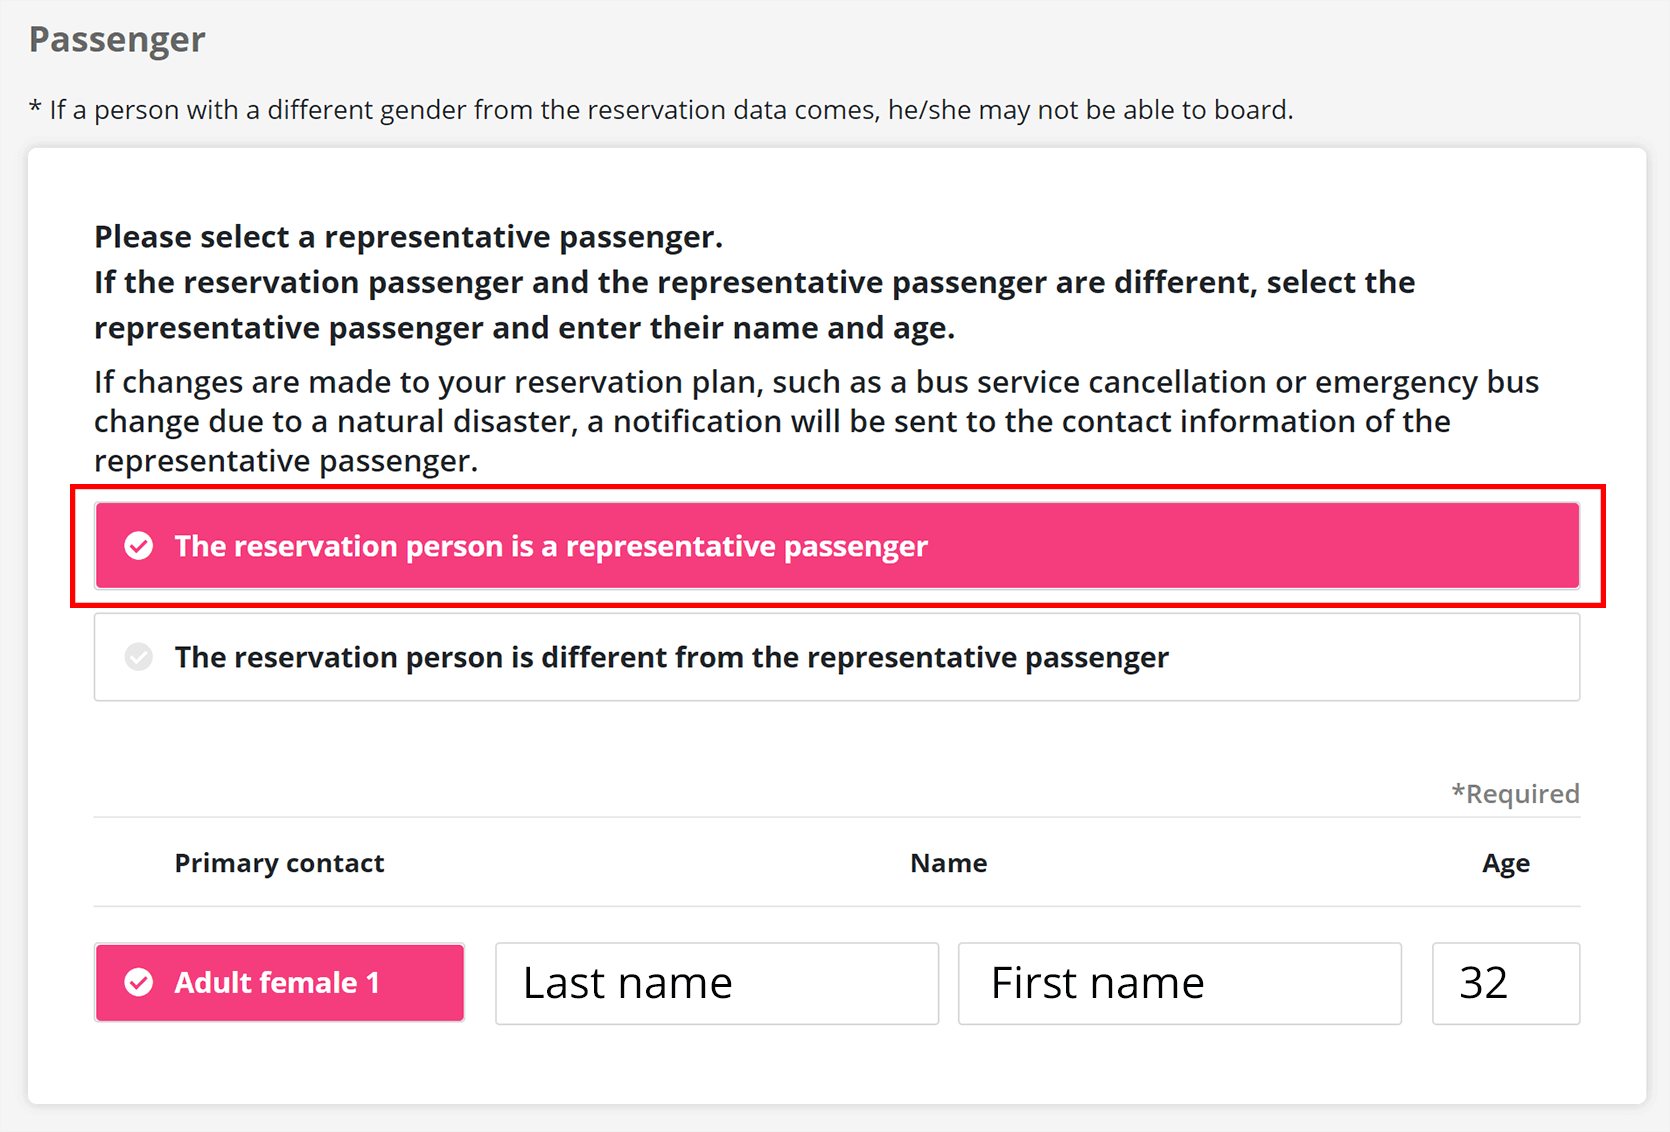 Step 10 Option 1: The reservation person is a representative passenger